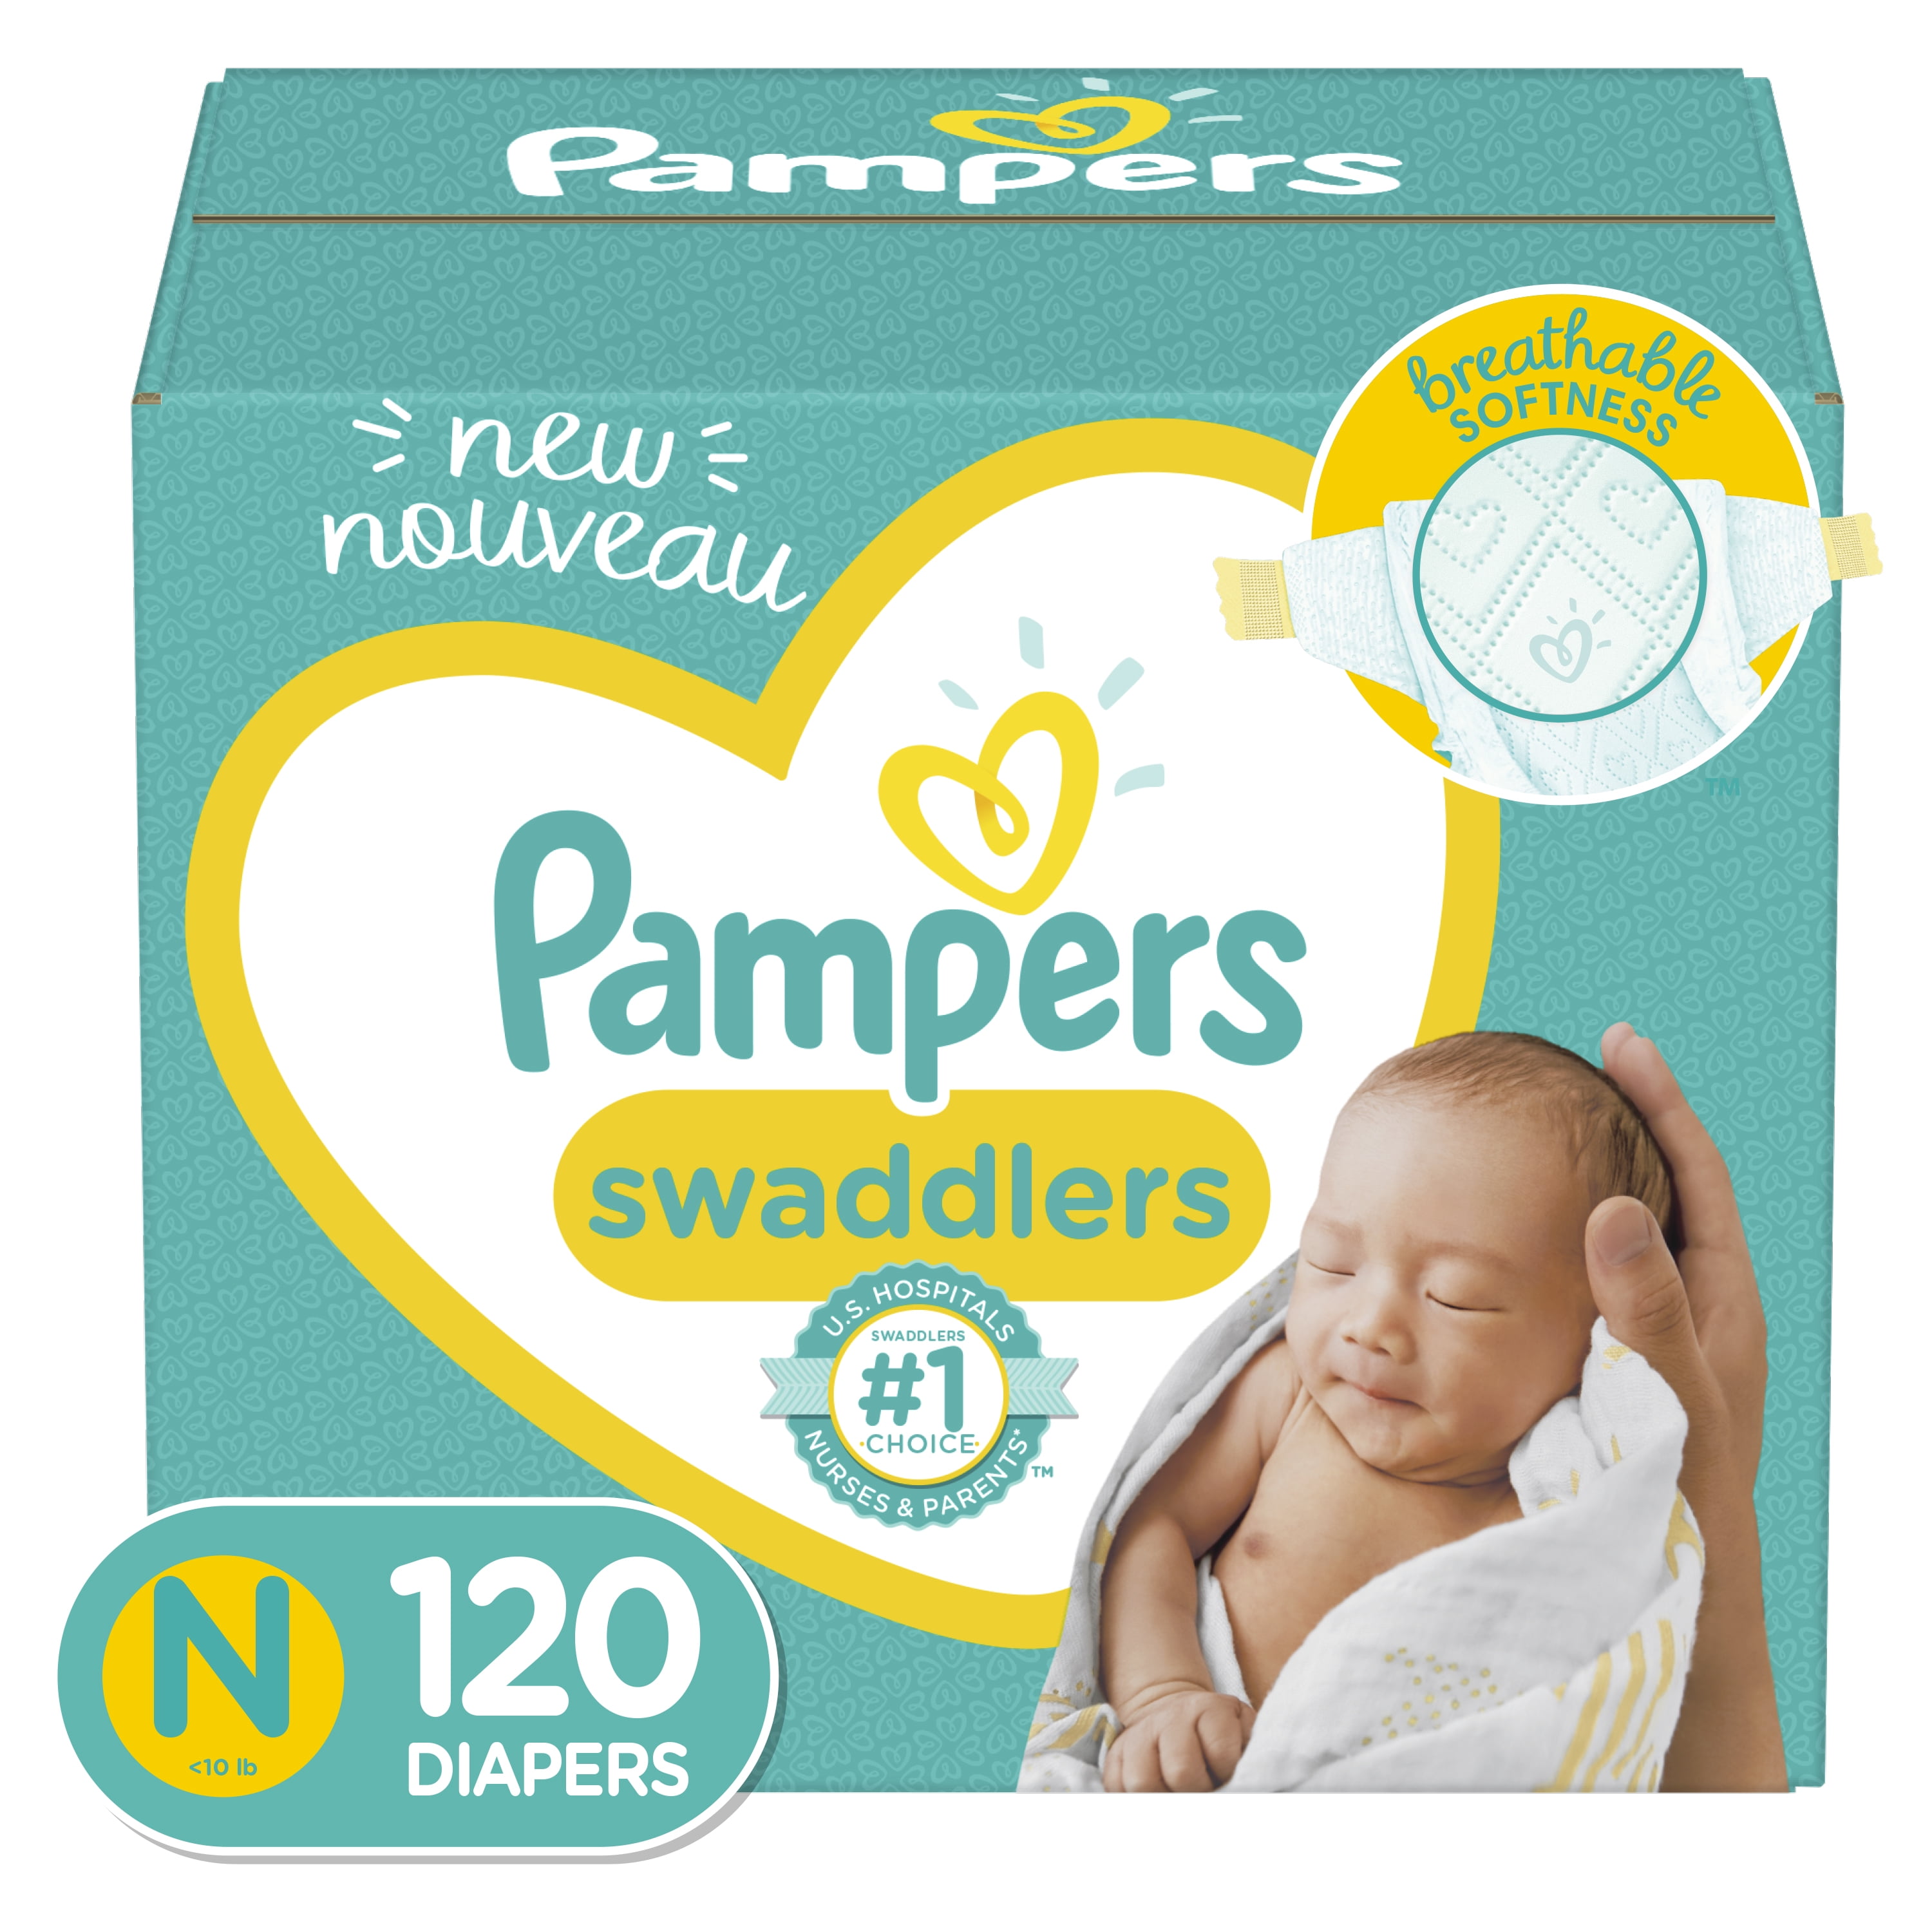 Baby Diapers Newborn/Size 0 (< 10 lb), 120 Count - Pampers Swaddlers,  ONE MONTH SUPPLY (Packaging May Vary) Newborn 